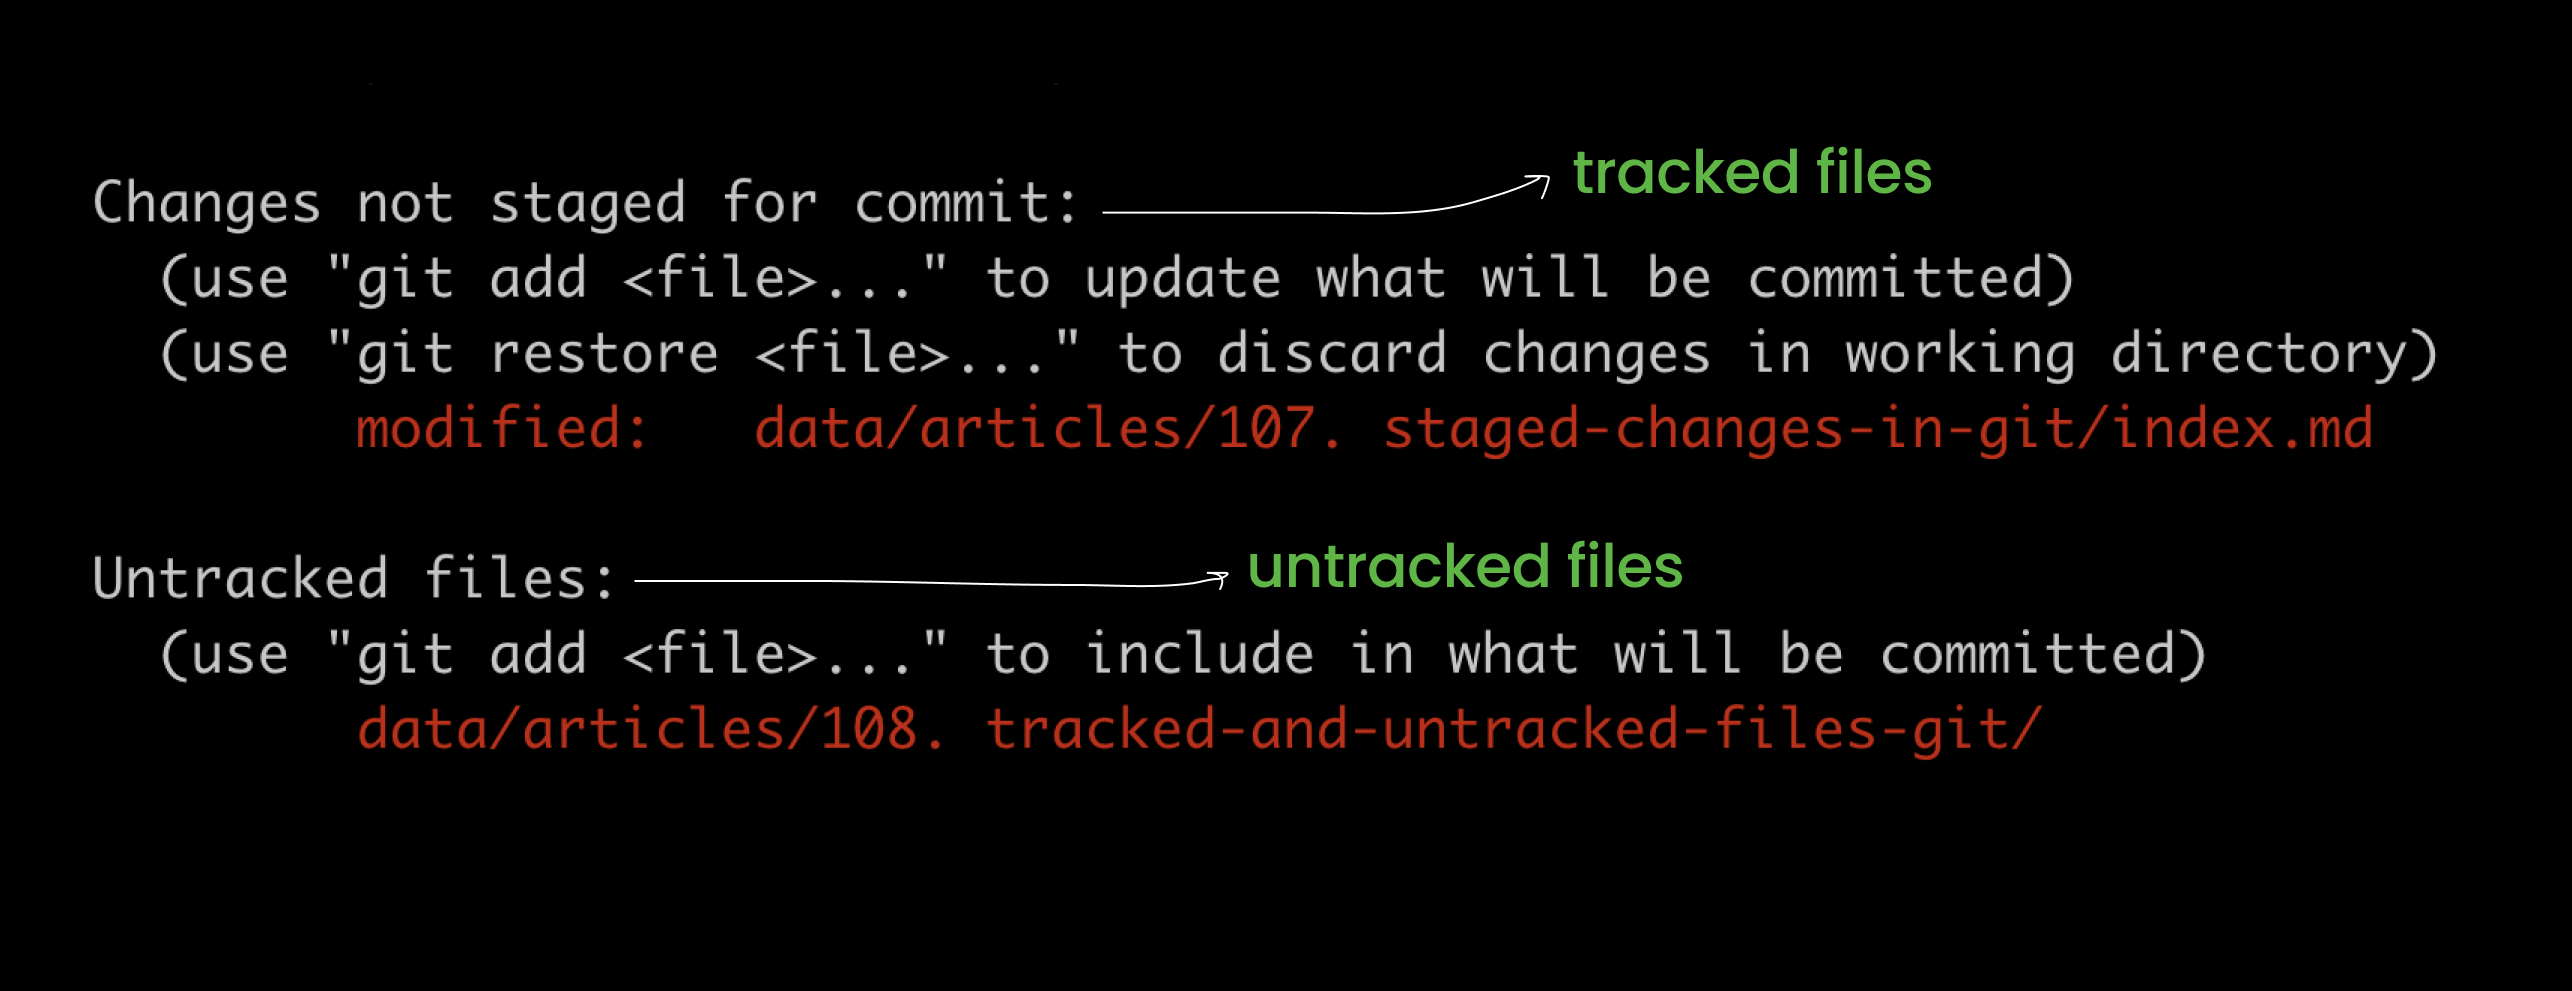 Git status showing tracked and untracked files